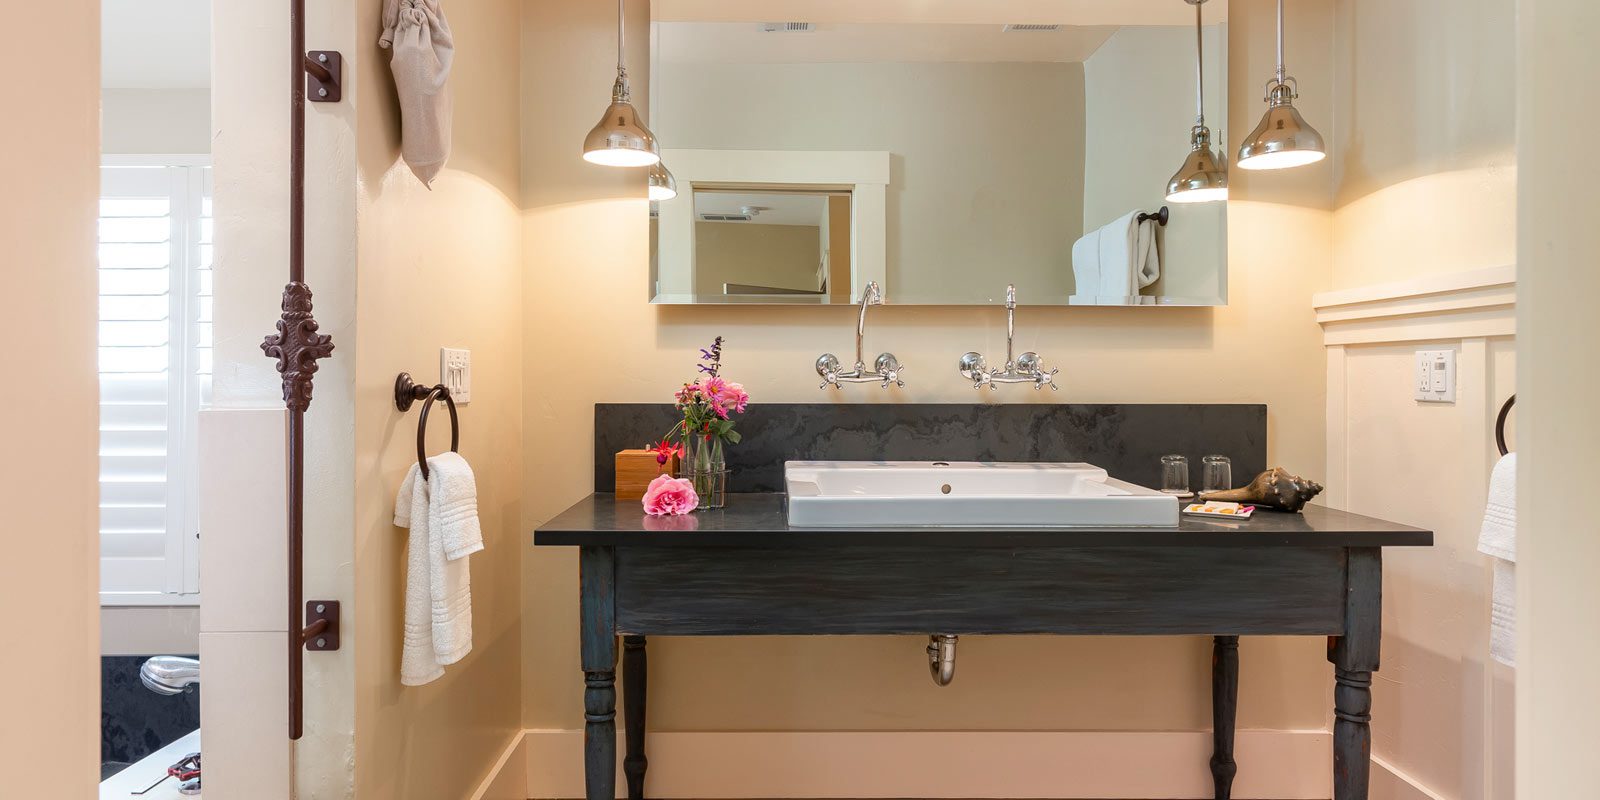 Interior of Farmhouse Room bathroom: Large double sink with black table and large mirror hung above.